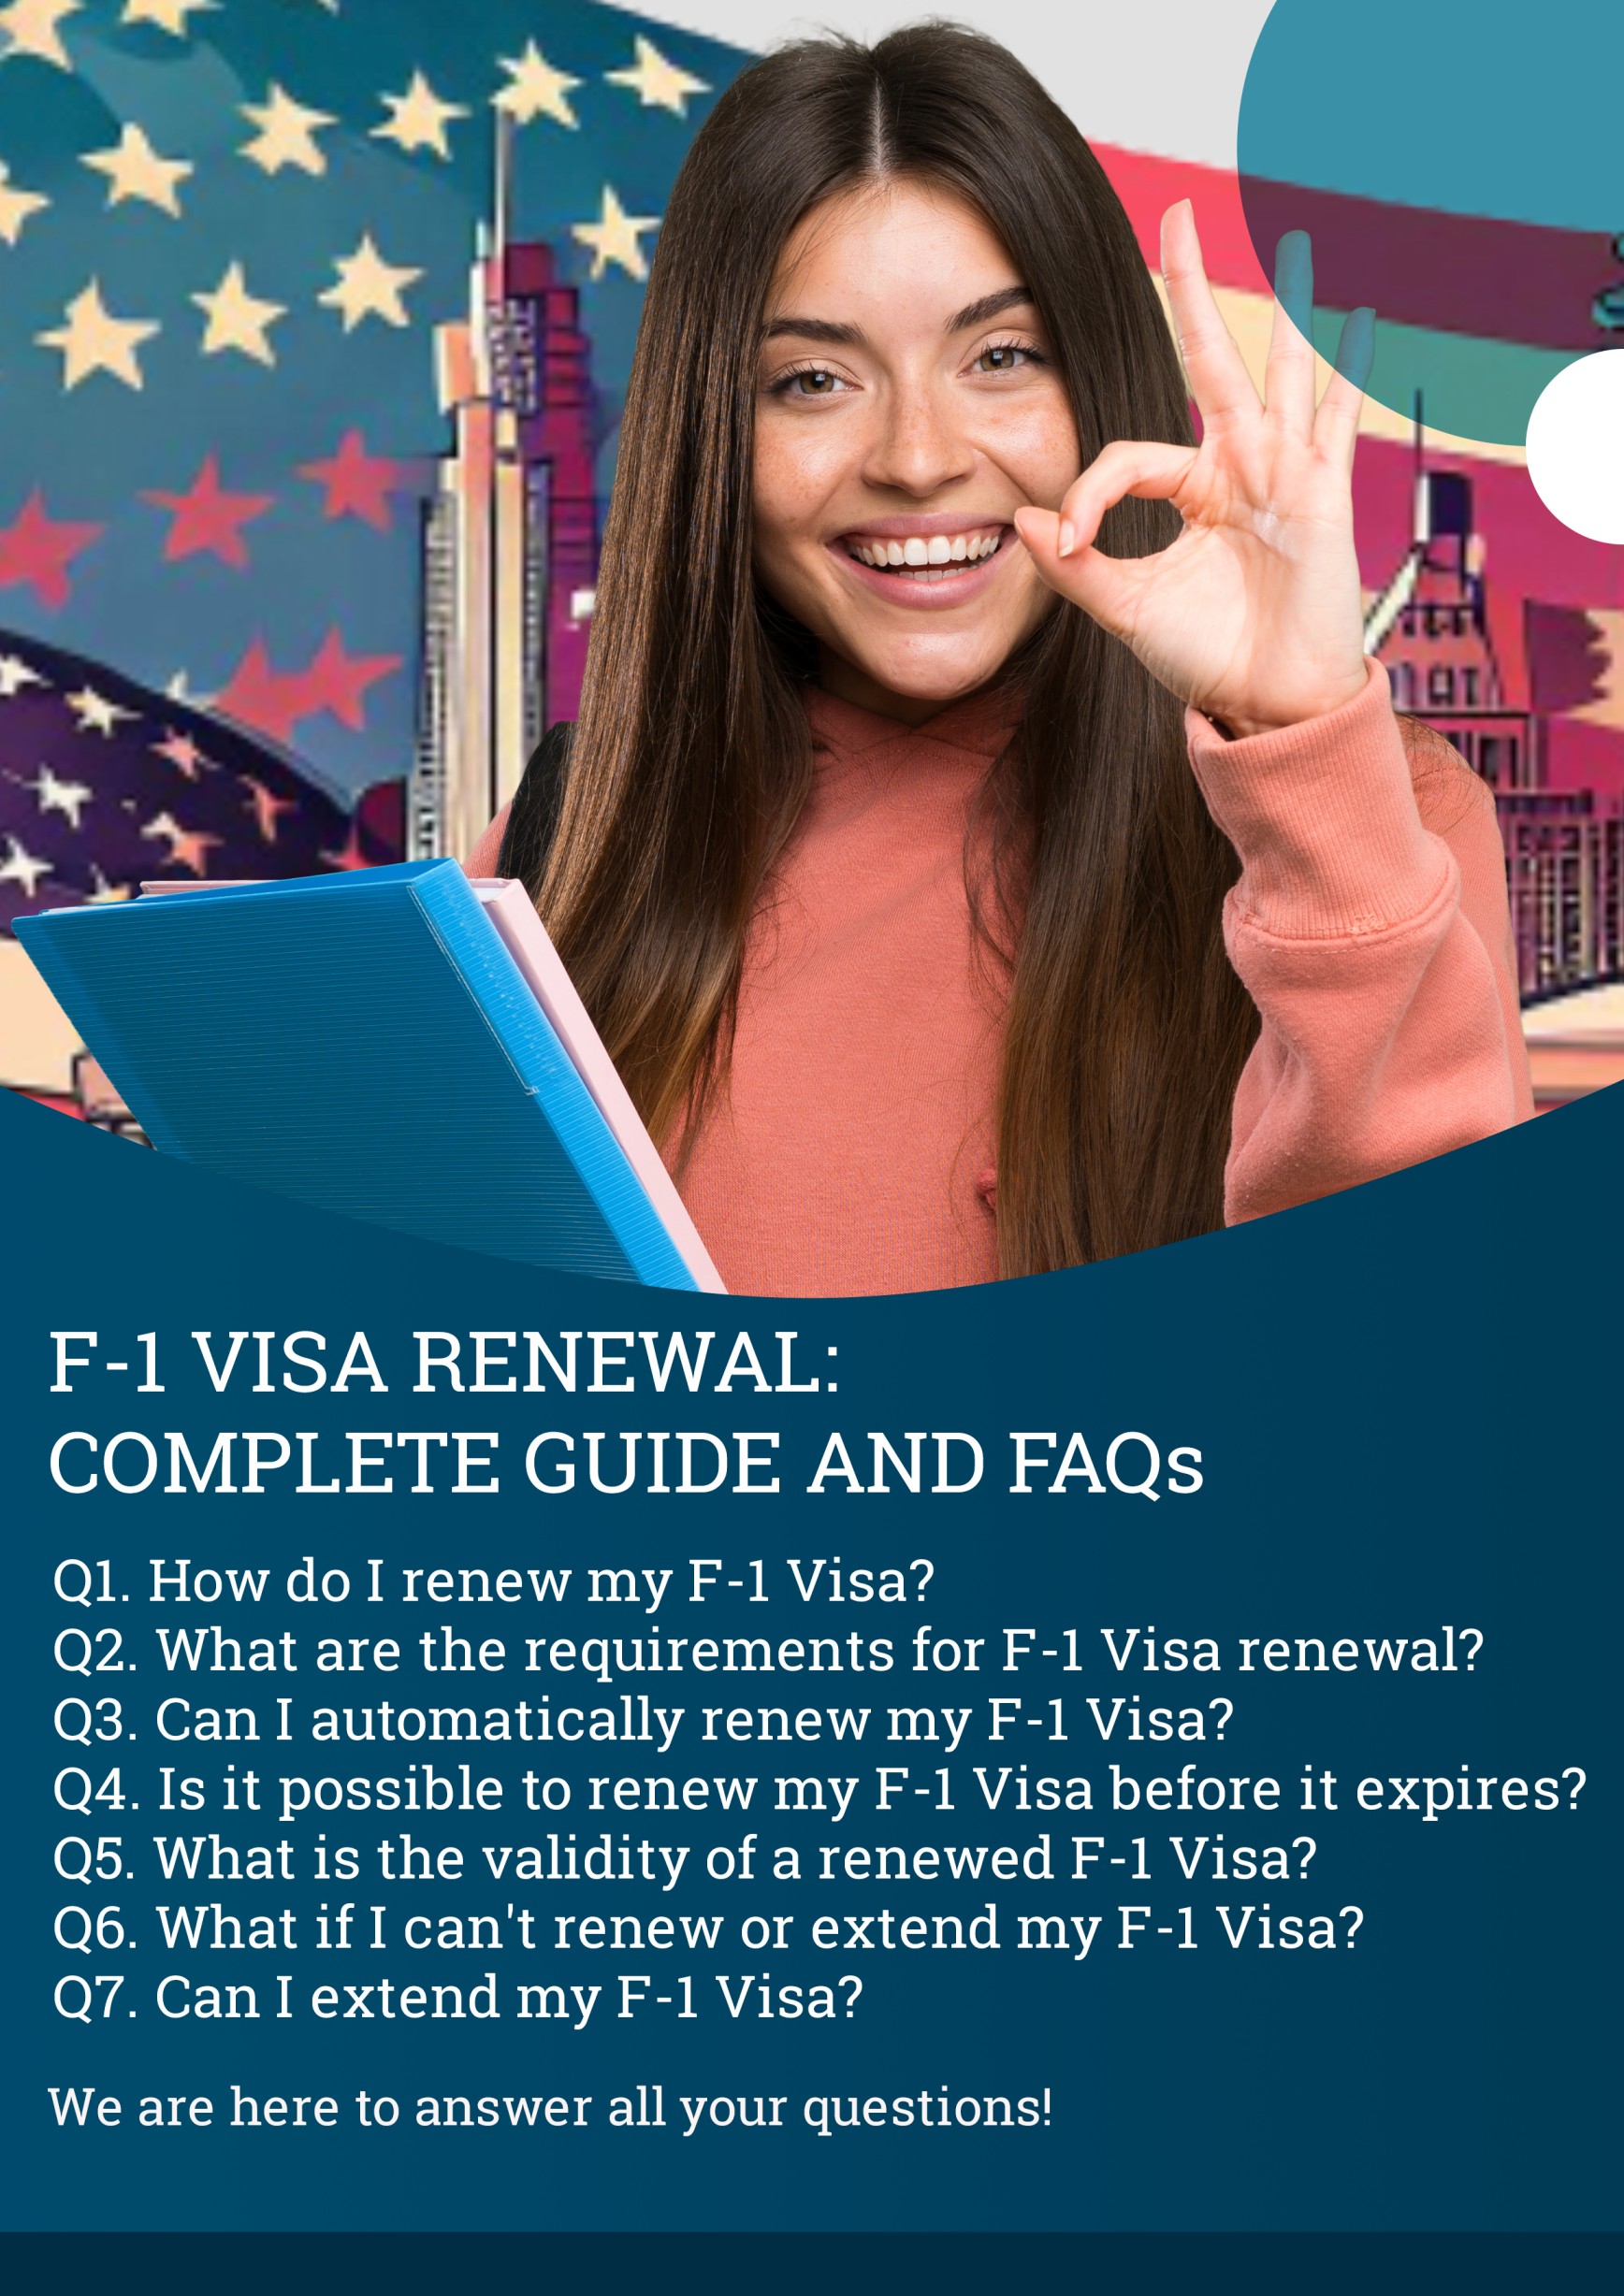 F-1 VISA RENEWAL: COMPLETE GUIDE AND FAQs